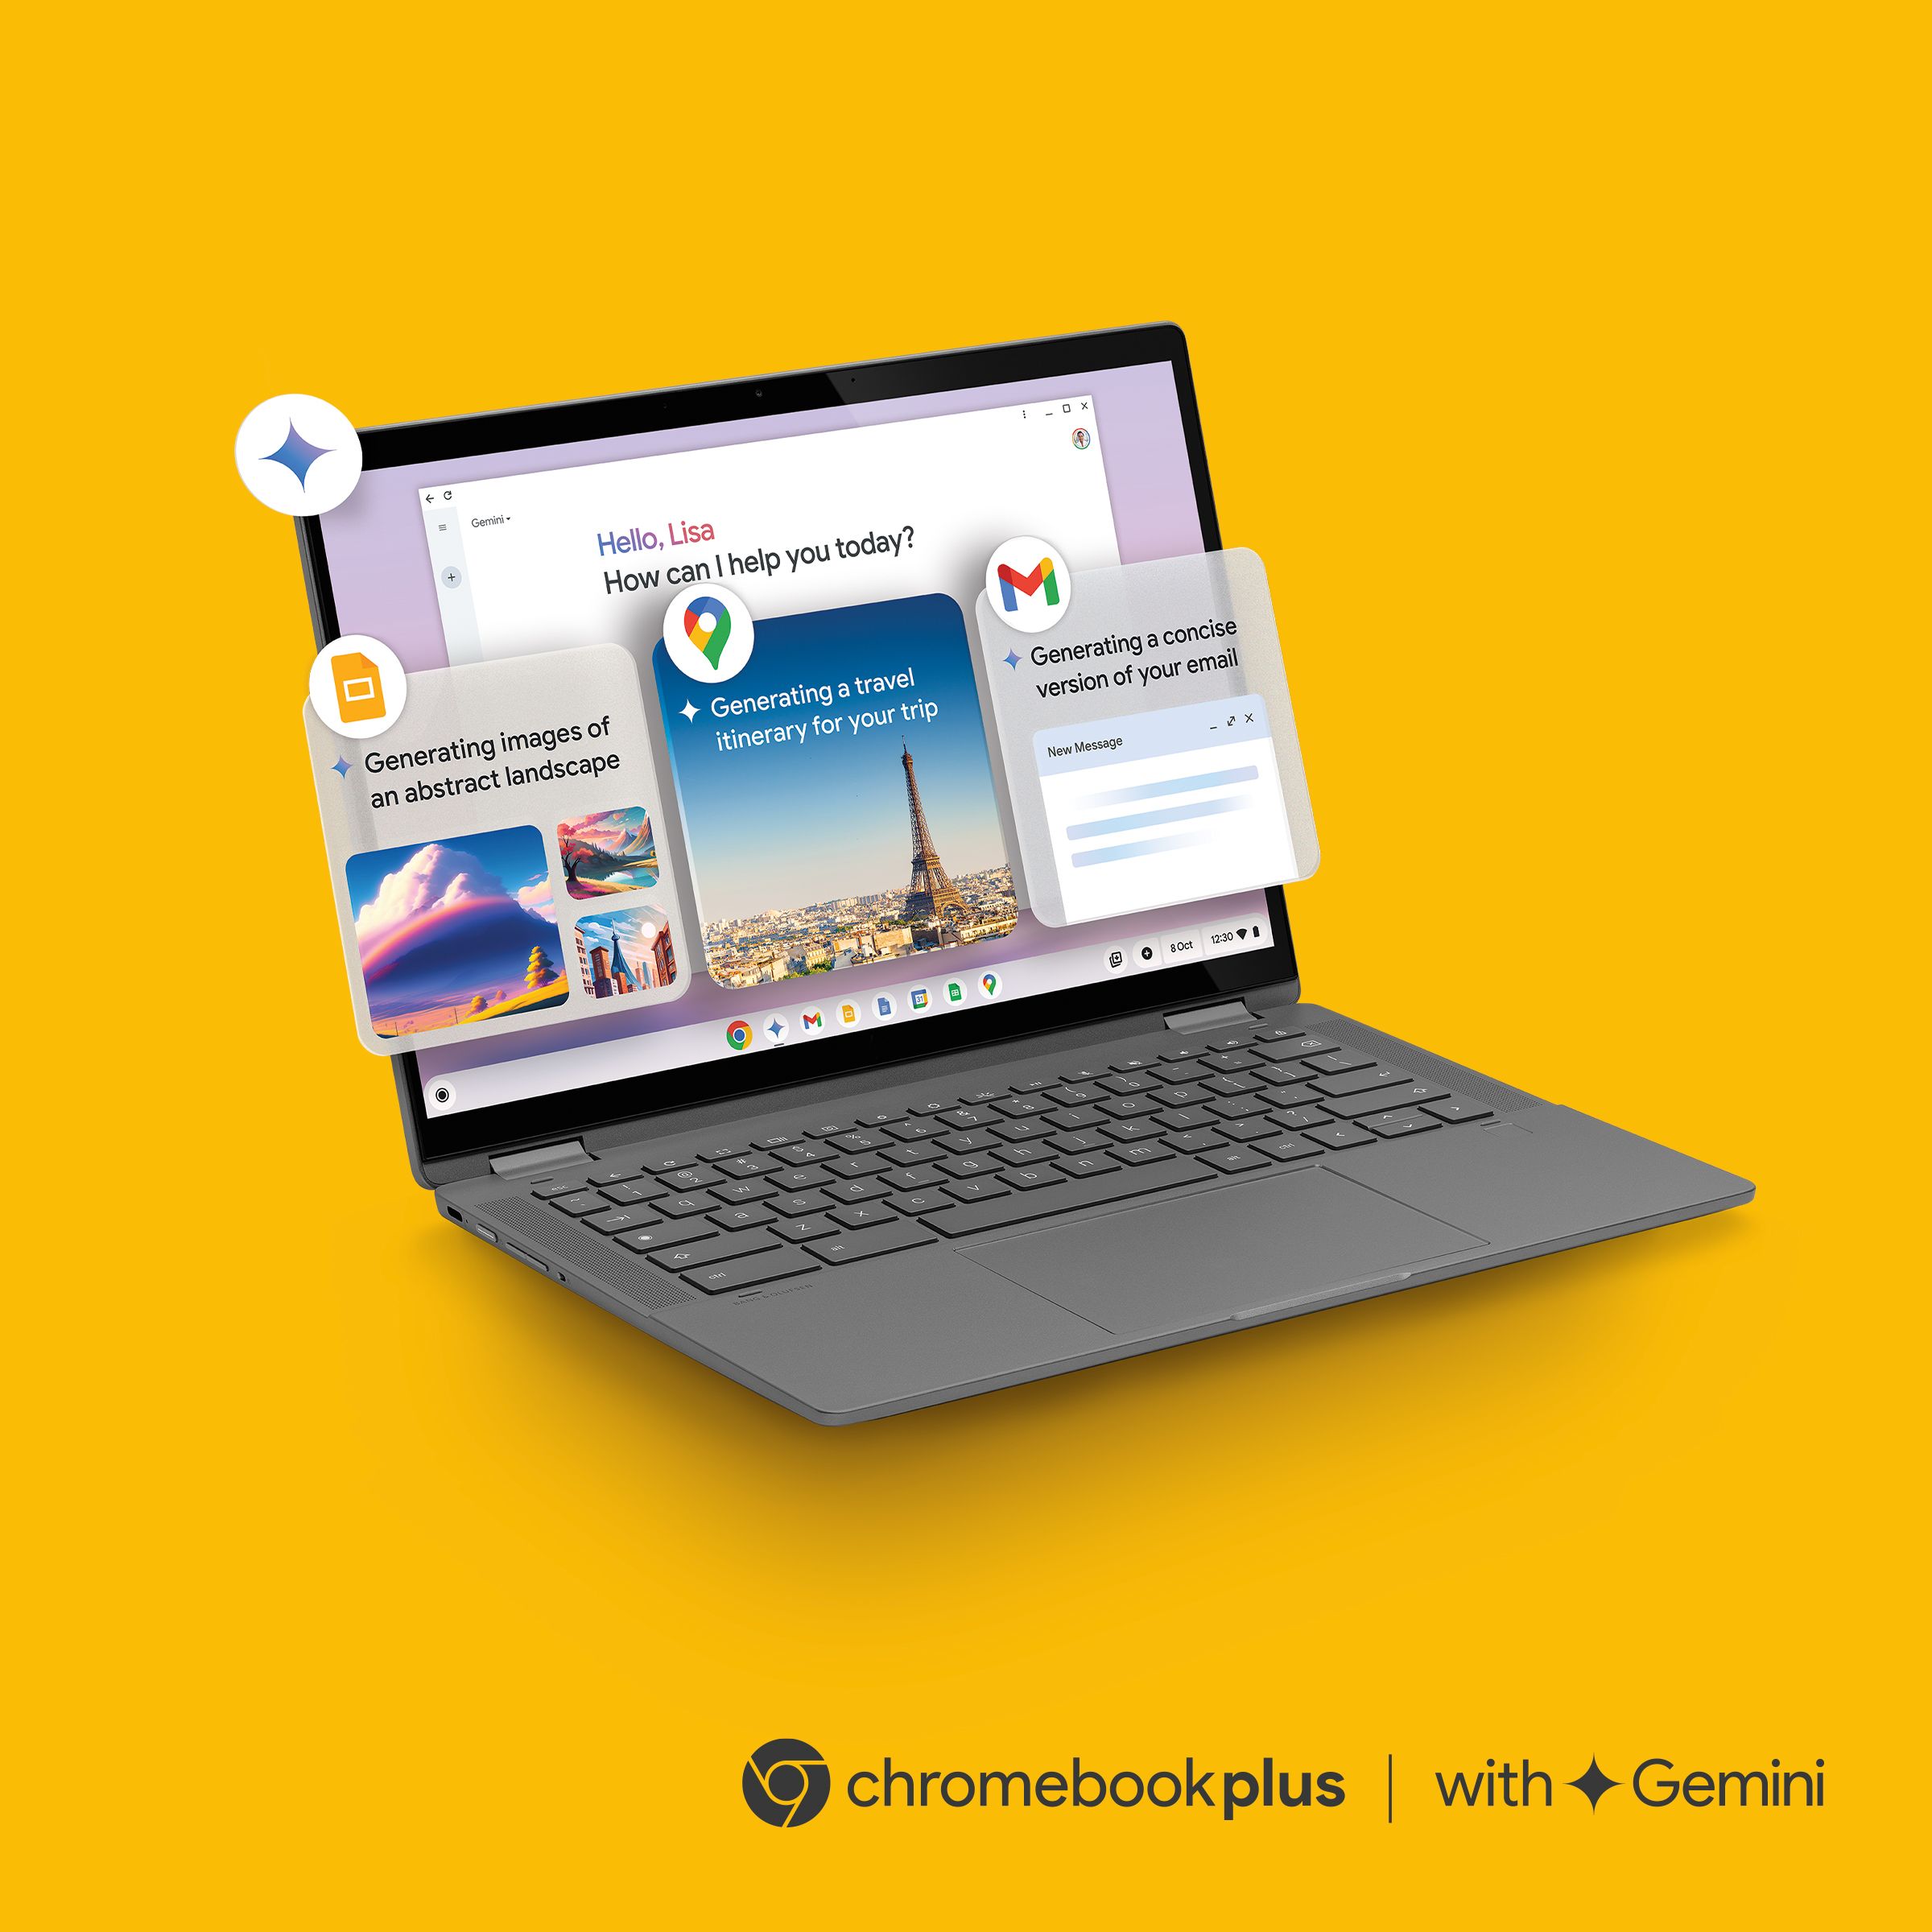 chromebook on a bright yellow background